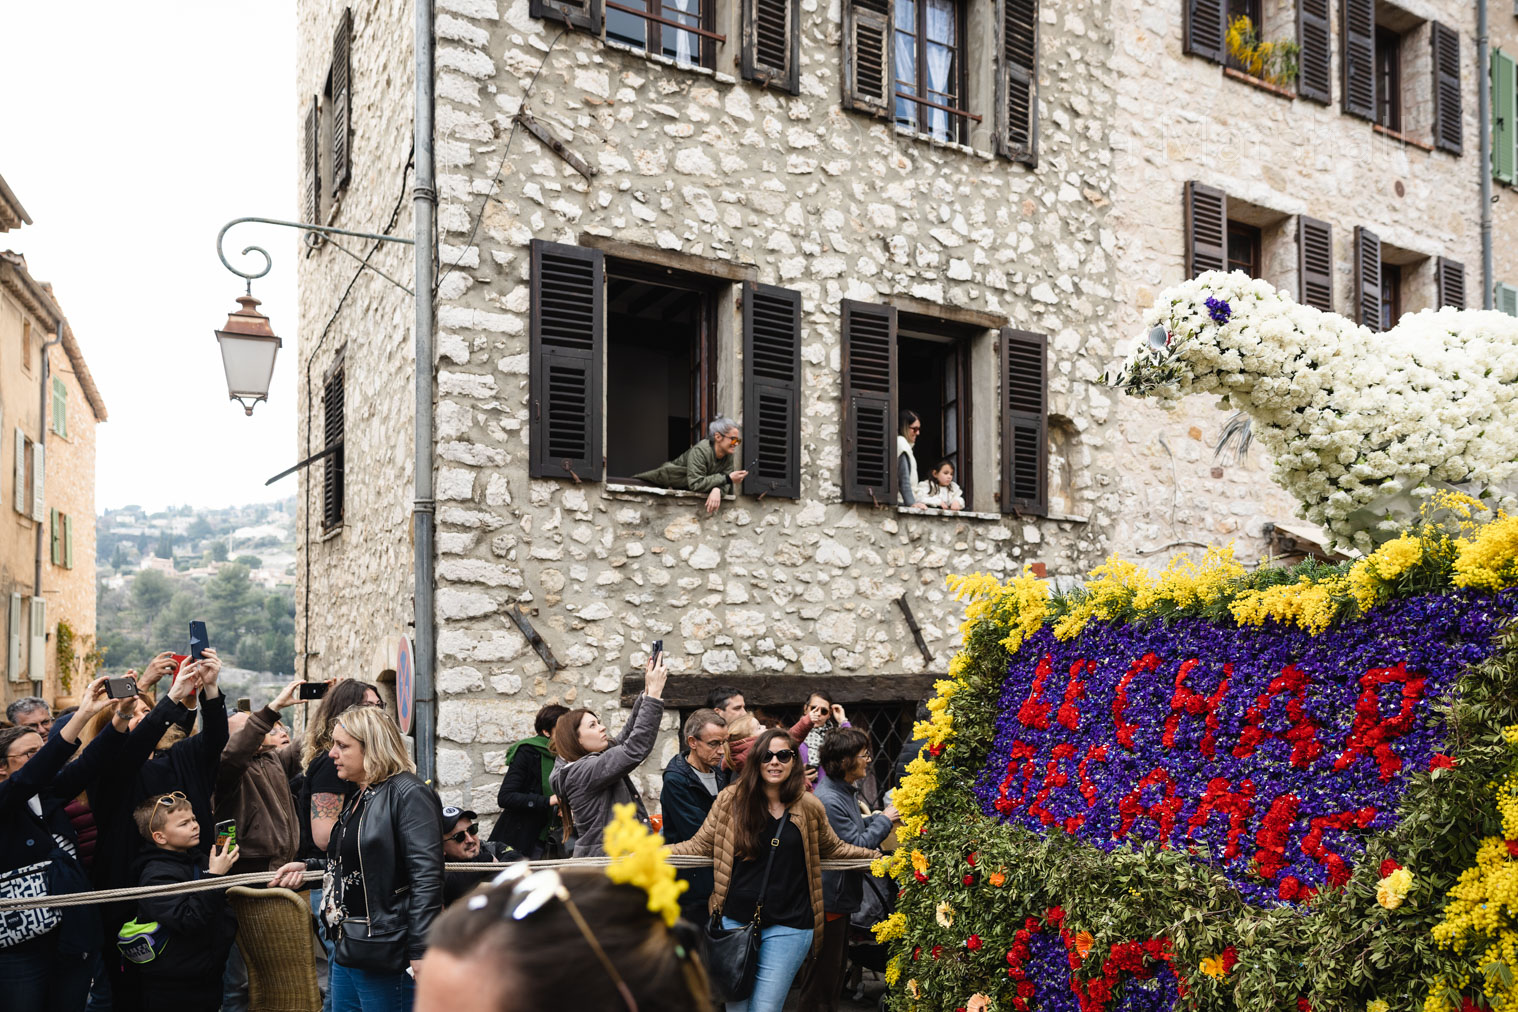 A float decorated with flowers passes by a village crowd